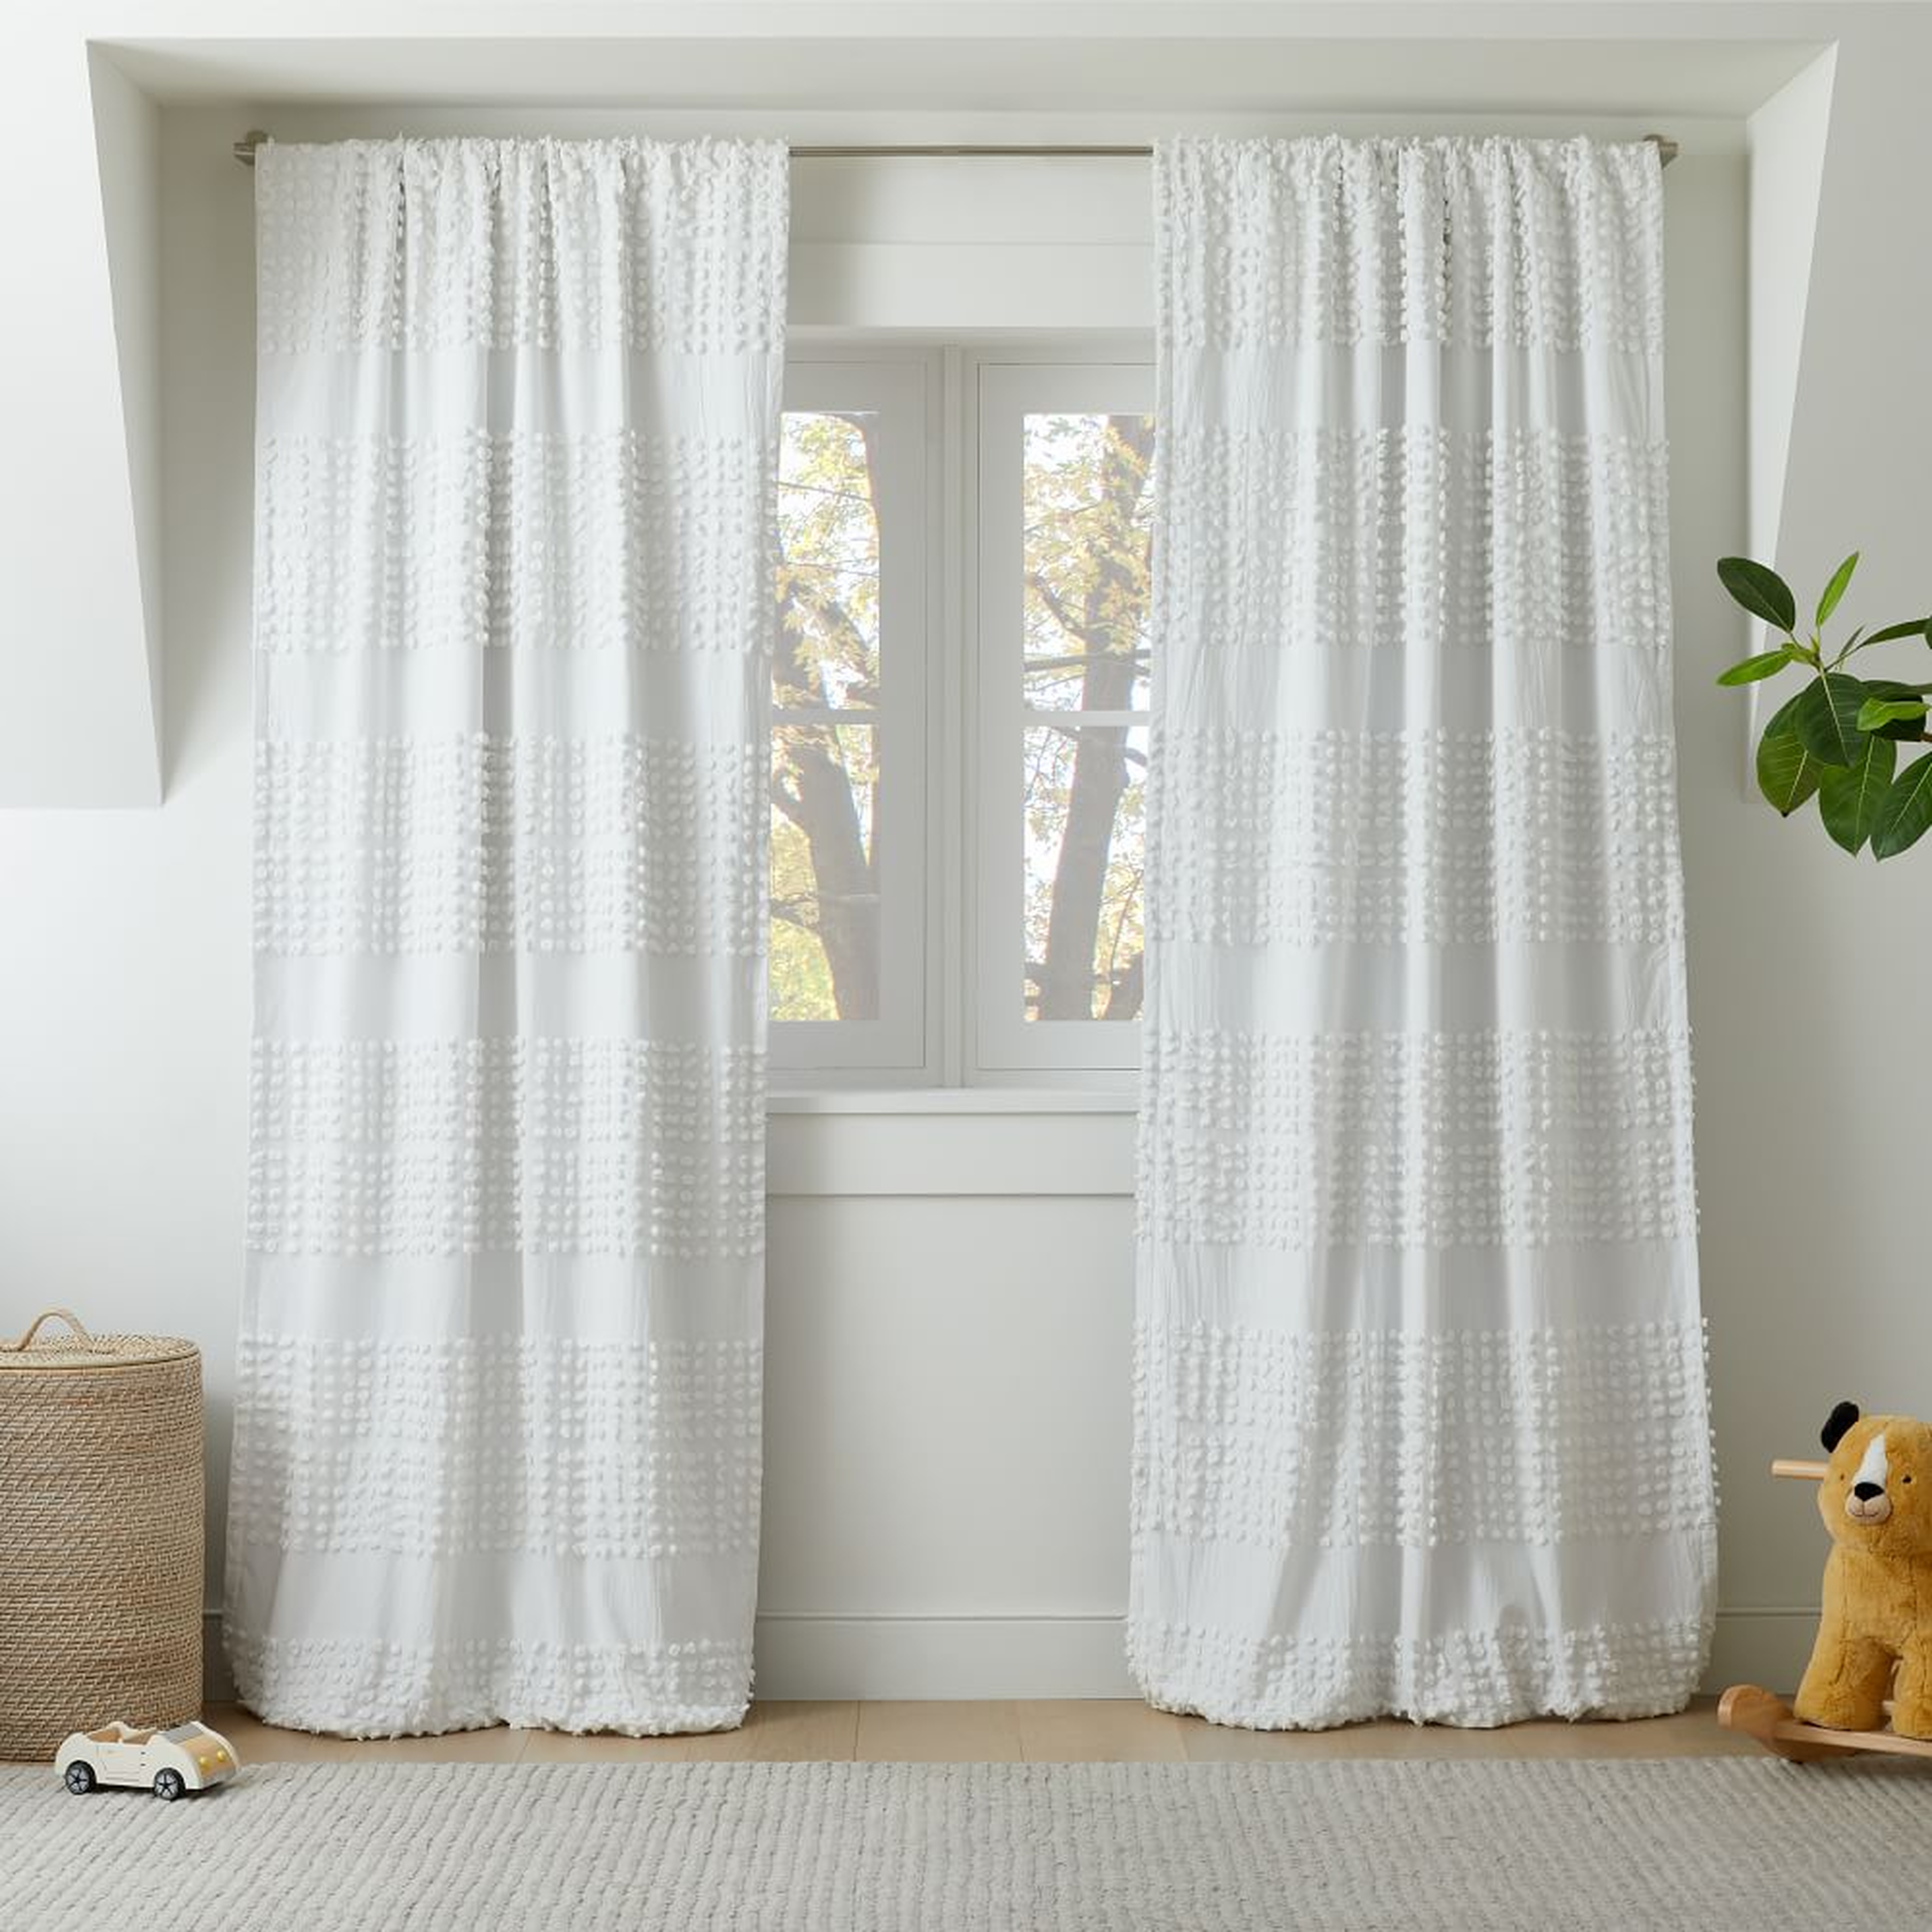 Candlewick Blackout Curtain Panel, 48X108, White, WE Kids - West Elm